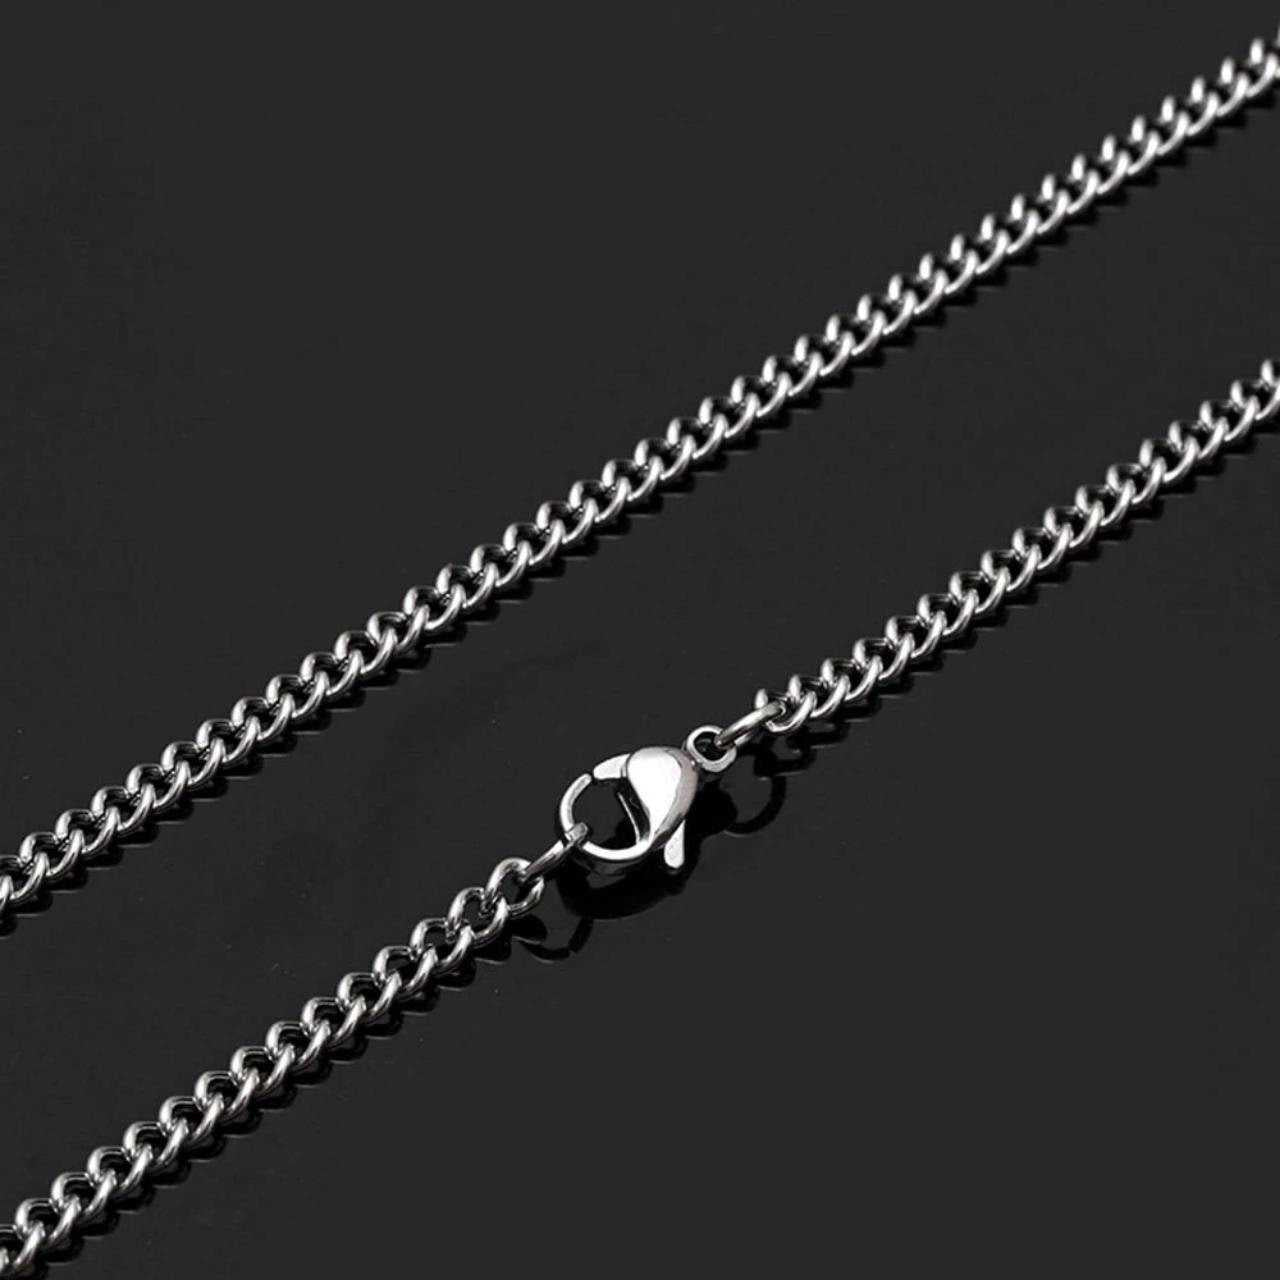 CRW Saturn Planet Necklace with 1.8mm curb chain in silver - Coin Necklaces for Women - Pattern Necklace for Men - Necklace with Pendant